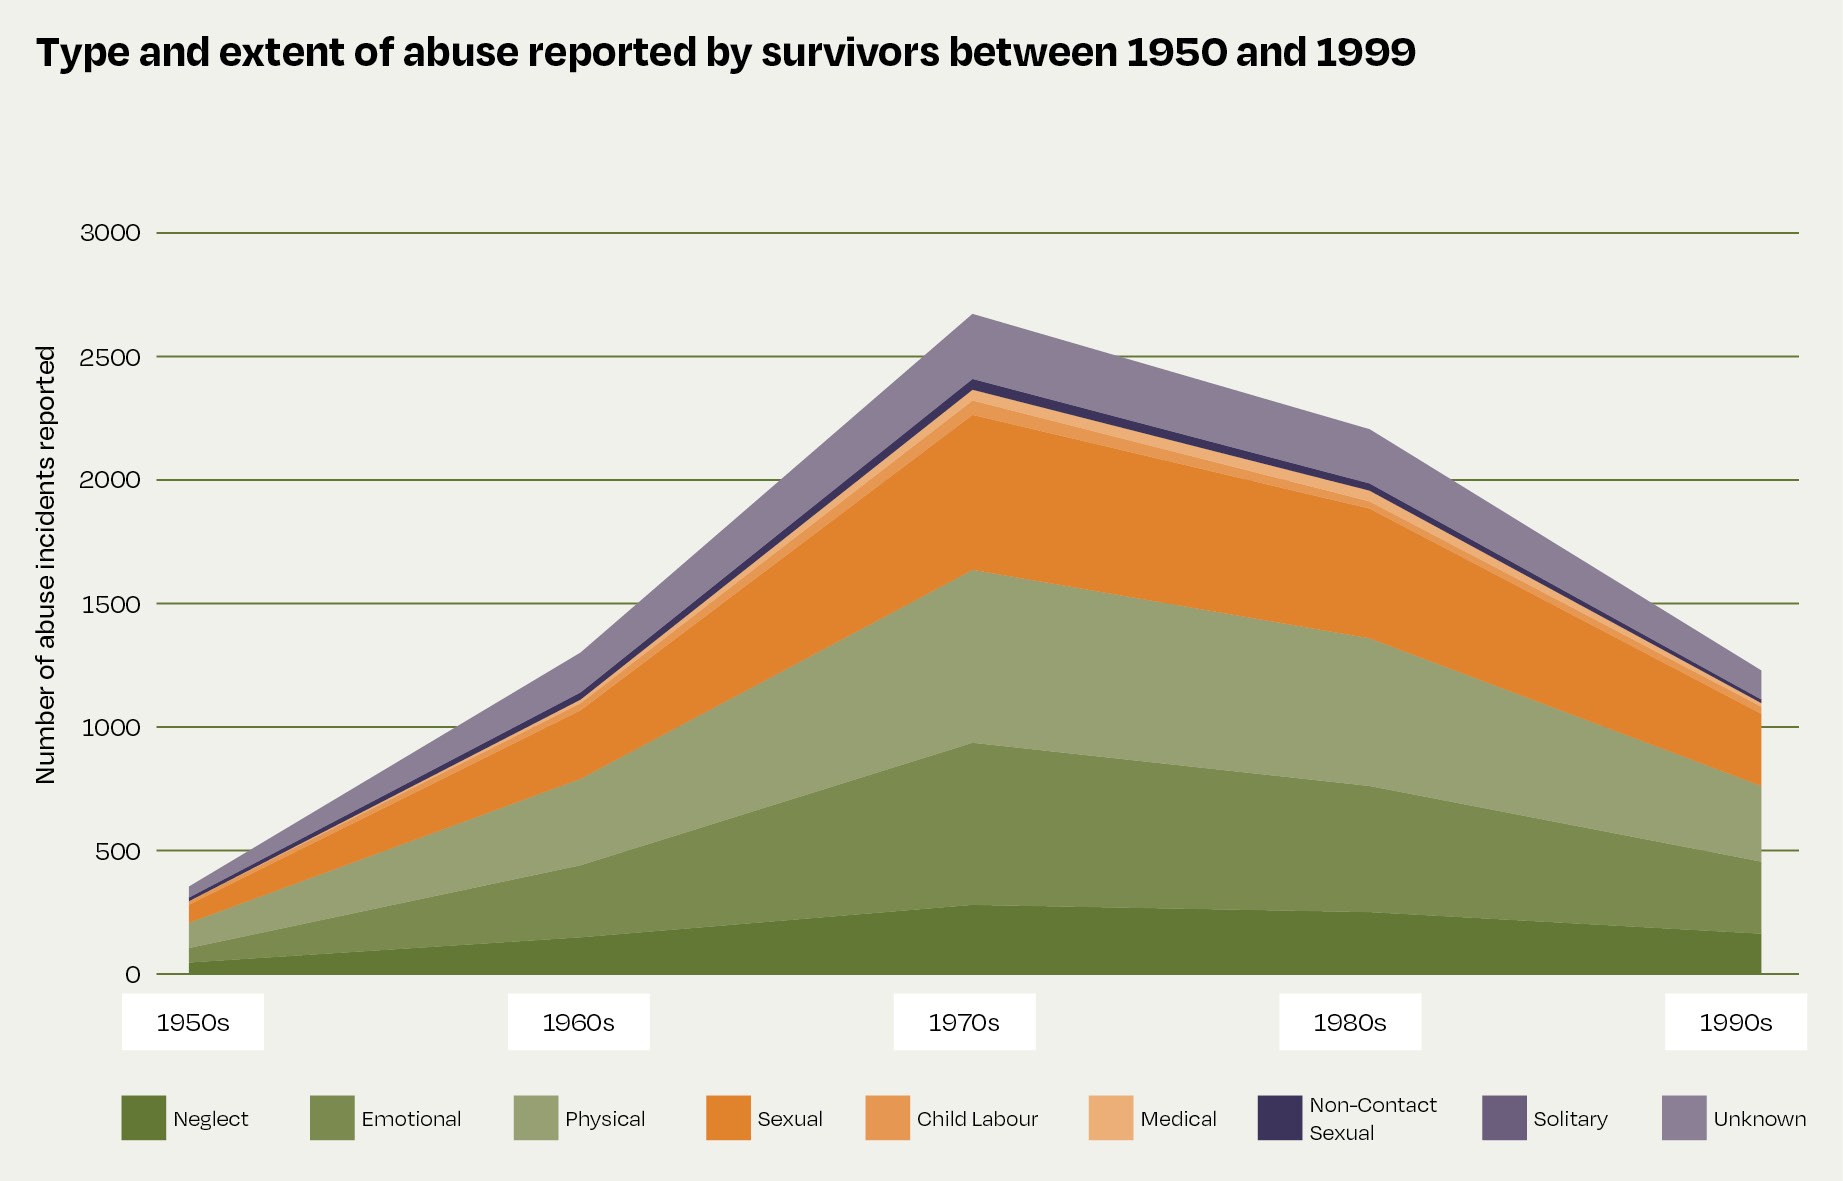 This graph shows the type and extent of abuse experienced by survivors between 1950 and 1999. For the 1950s, survivors told the Inquiry about 337 incidents of abuse. The extent of abuse claims increased after 1960, rising to 1,200 for the decade. Extent of abuse incident claims reached a peak for the 1970s, with 2,390 claims, then dropped slightly but remained high for the 1980s with 1,881 claims, before starting to decline. Claims of abuse for the 1990s dropped to roughly the same level as 1960, with 1,017 claims for that decade. Physical, sexual and emotional abuse were the most common types of abuse incidents reported to the Inquiry, followed by neglect, non-contact sexual, solitary, medical, child labour and unknown.